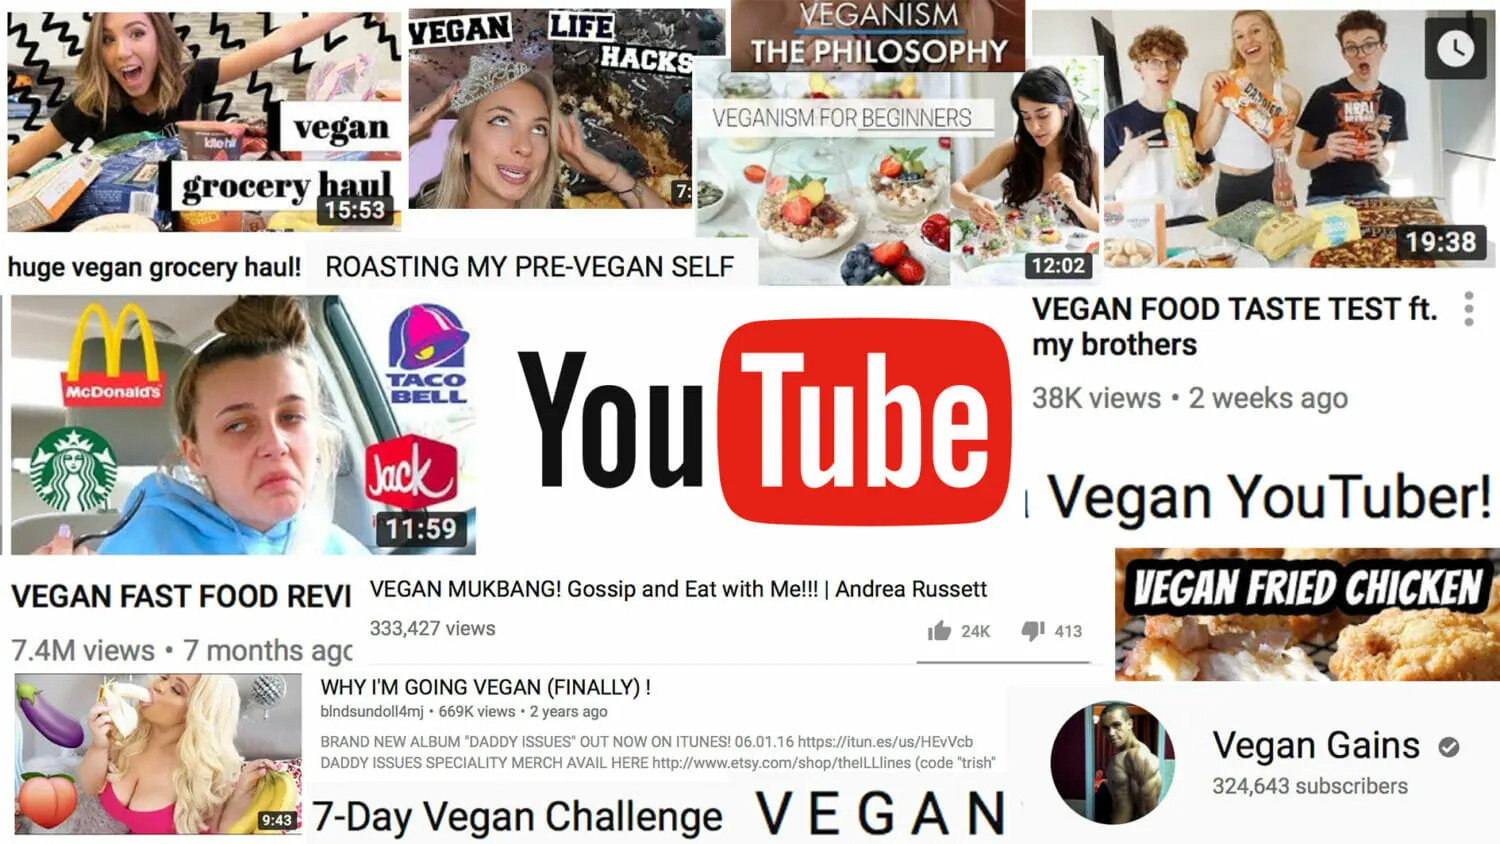 In this image: collage of Vegan YouTube video thumbnails.